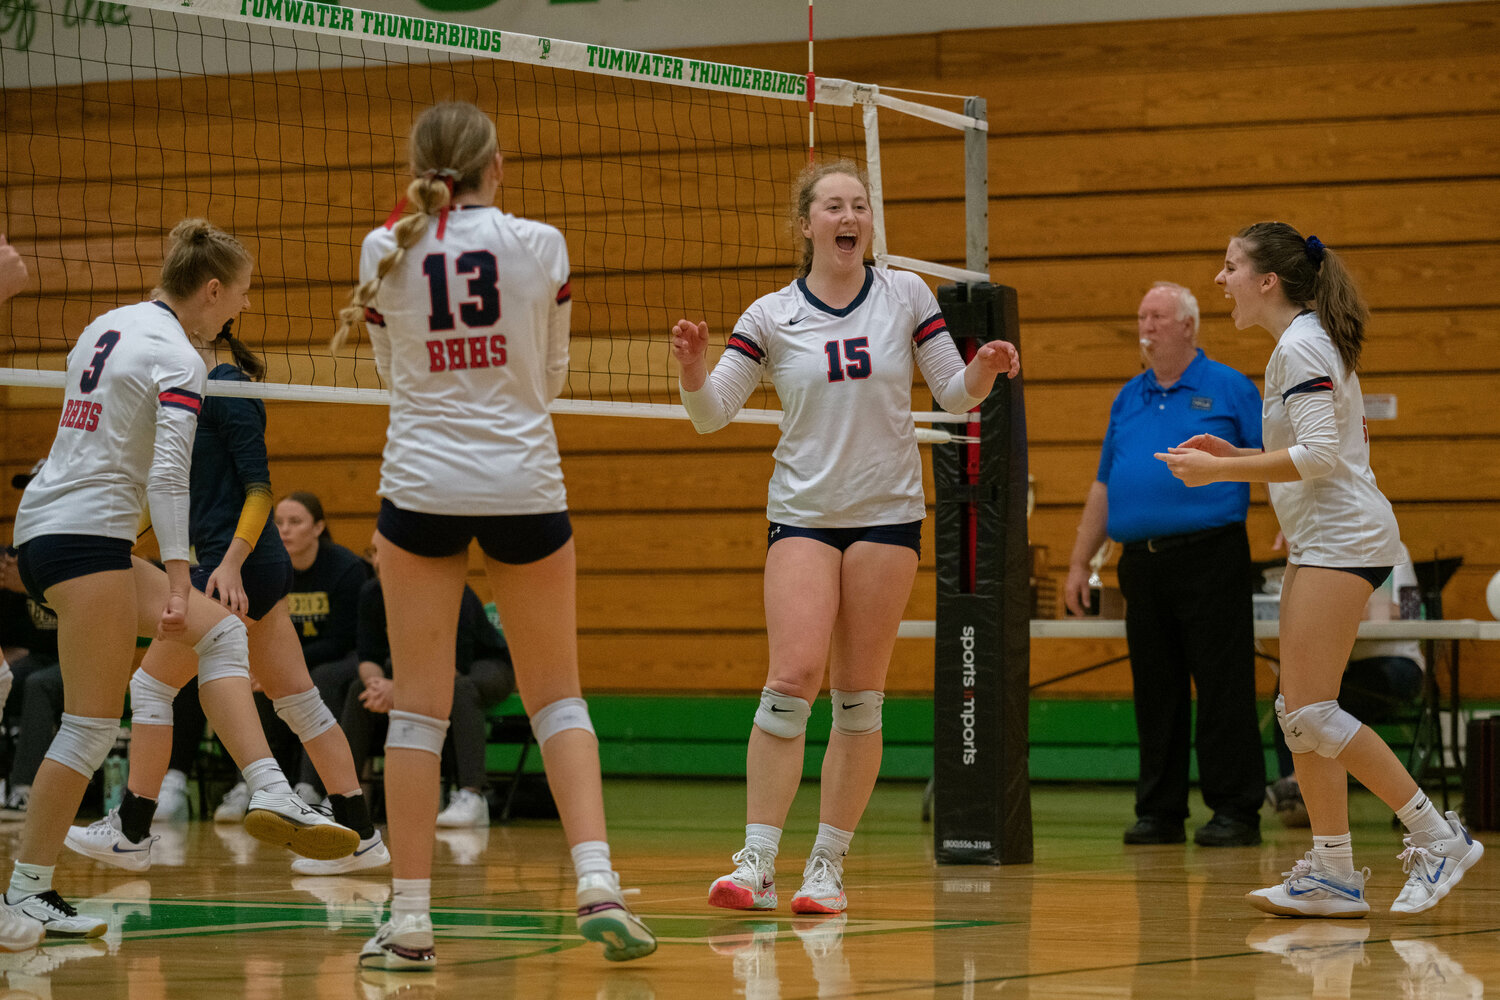 The Wolves celebrate a point during Black Hills' four-set win over Aberdeen in a winner-to-State match at the 2A District 4 Tournament, Nov. 4 at Tumwater.